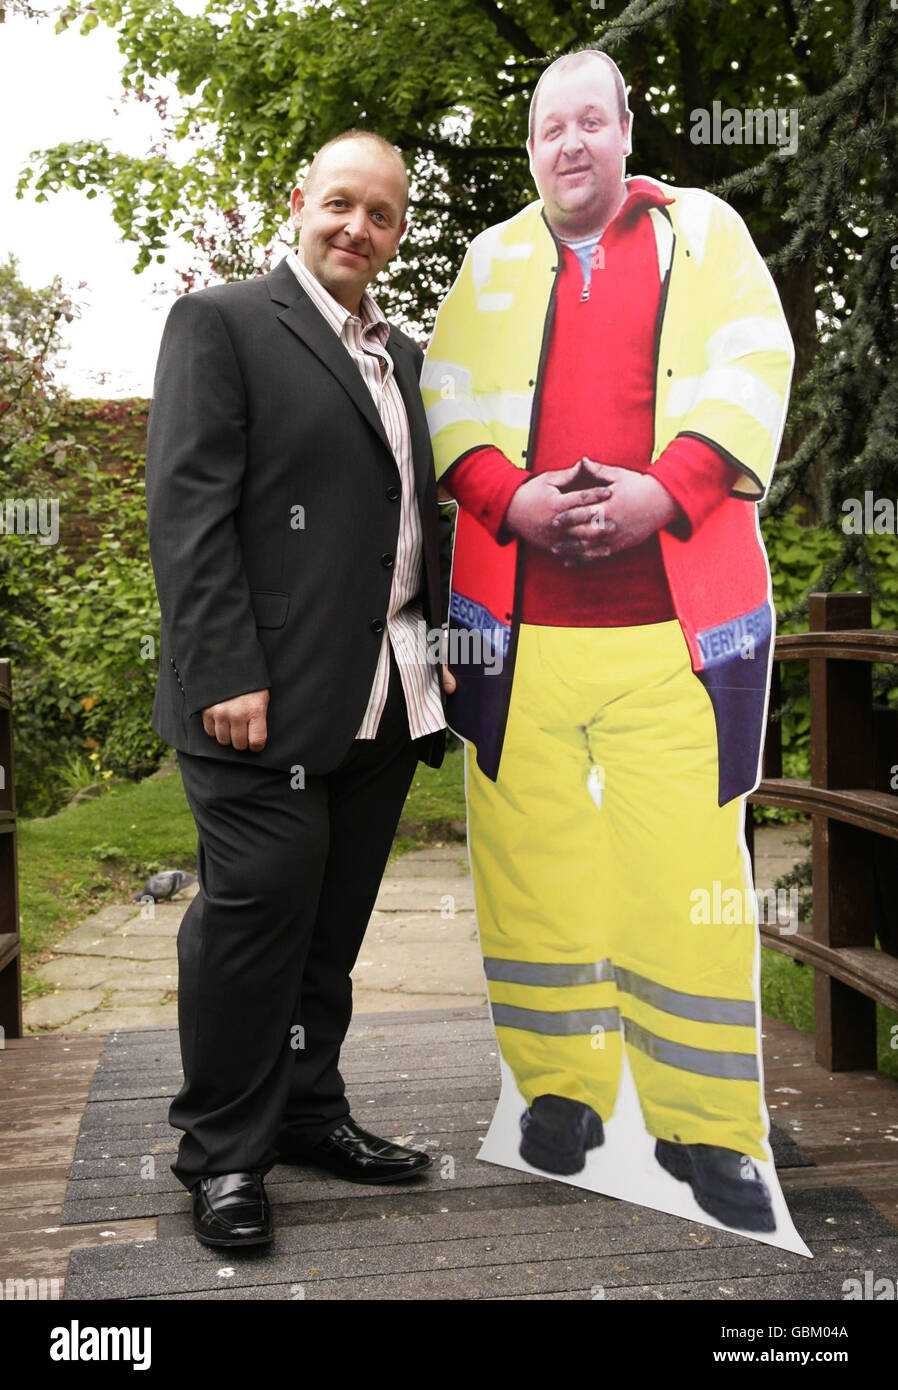 Forty year old John Devonshire (who now weighs 18st 13lbs, losing 16st 9lbs), from Llanrwst in Conwy, North Wales, poses with a cardboard cutout (taken when John weighed 30 stone) is crowned Slimming World's Greatest Loser 2009 from the 10 finalists at the awards, at Kensington Roof Gardens in west London, Thursday 30 April 2009. PRESS ASSOCIATION Photo credit should read: Yui Mok/PA Stock Photo